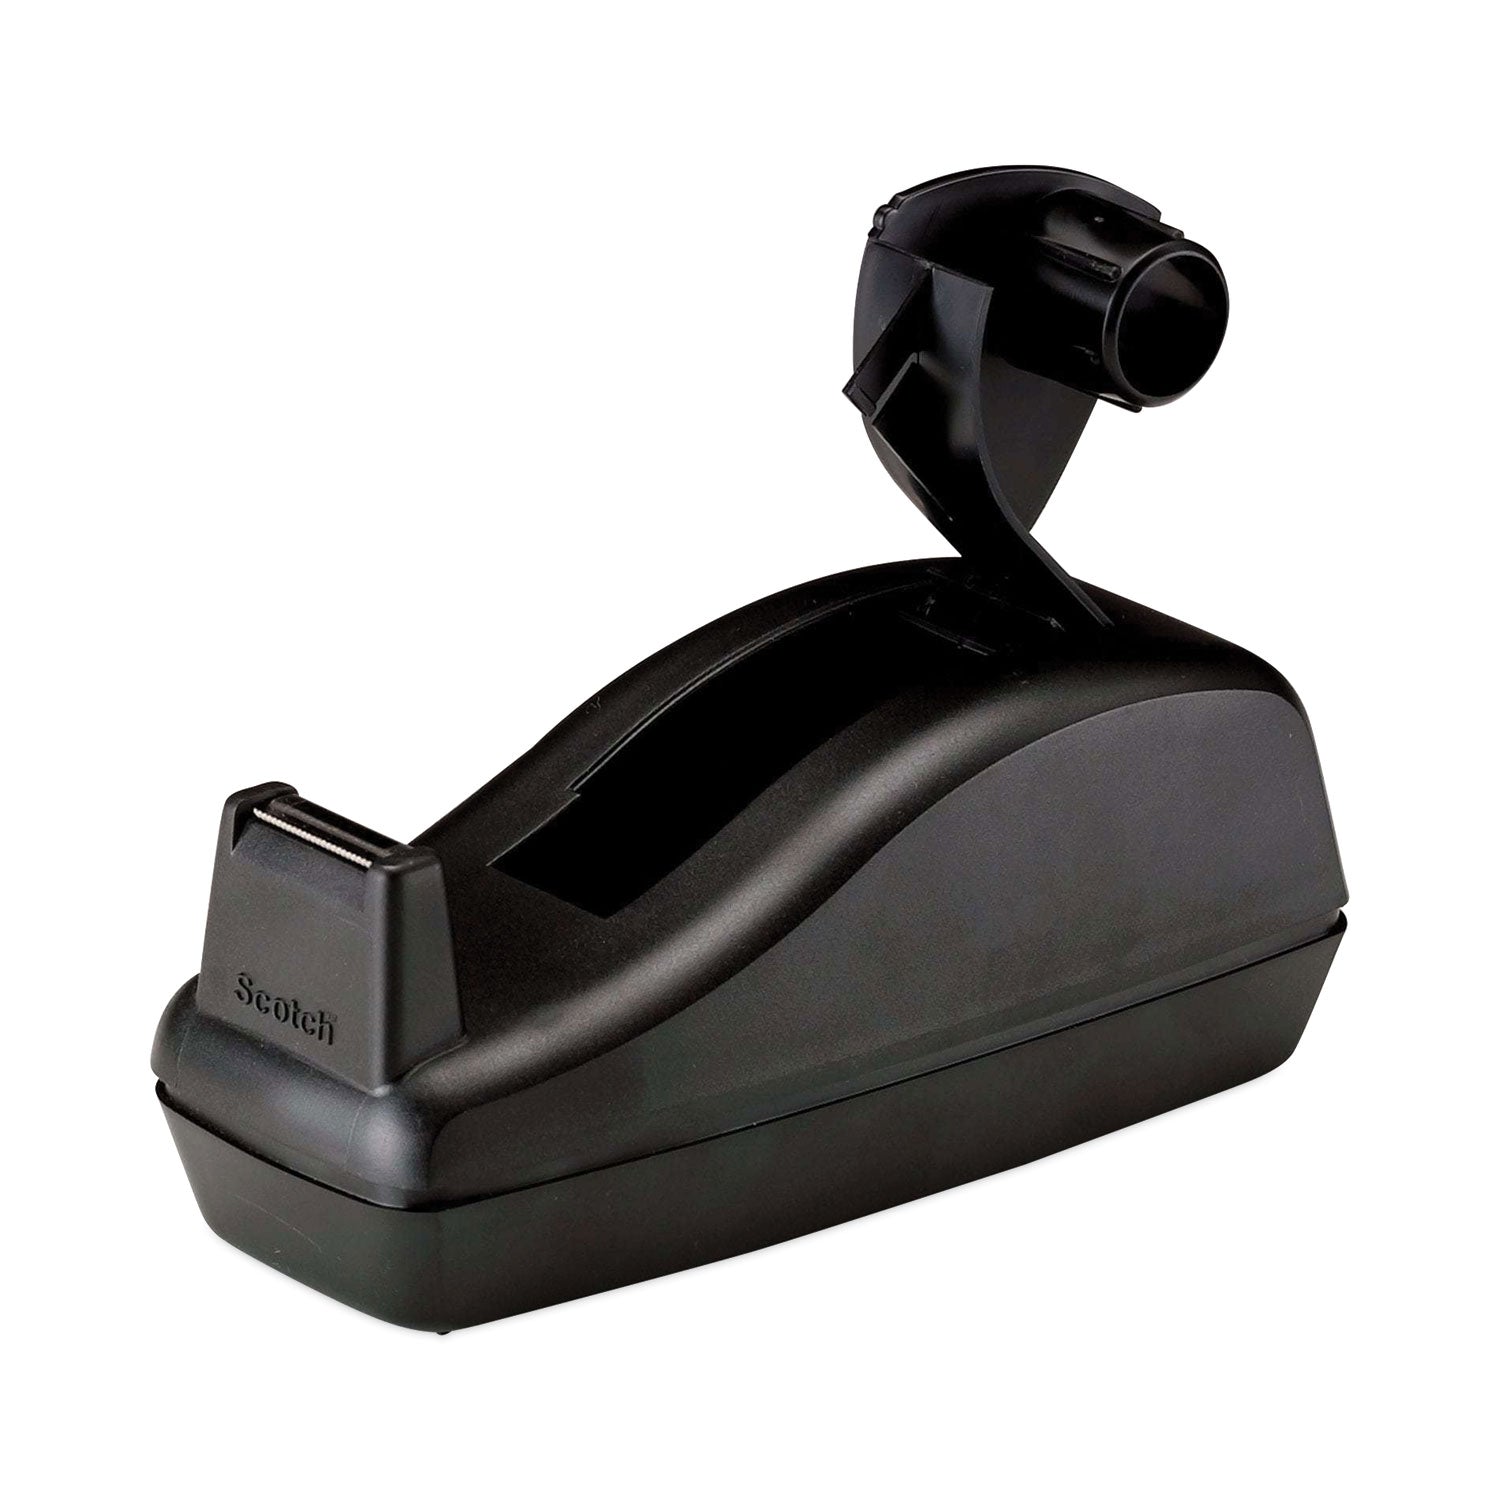 Deluxe Desktop Tape Dispenser, Heavily Weighted, Attached 1" Core, Black - 